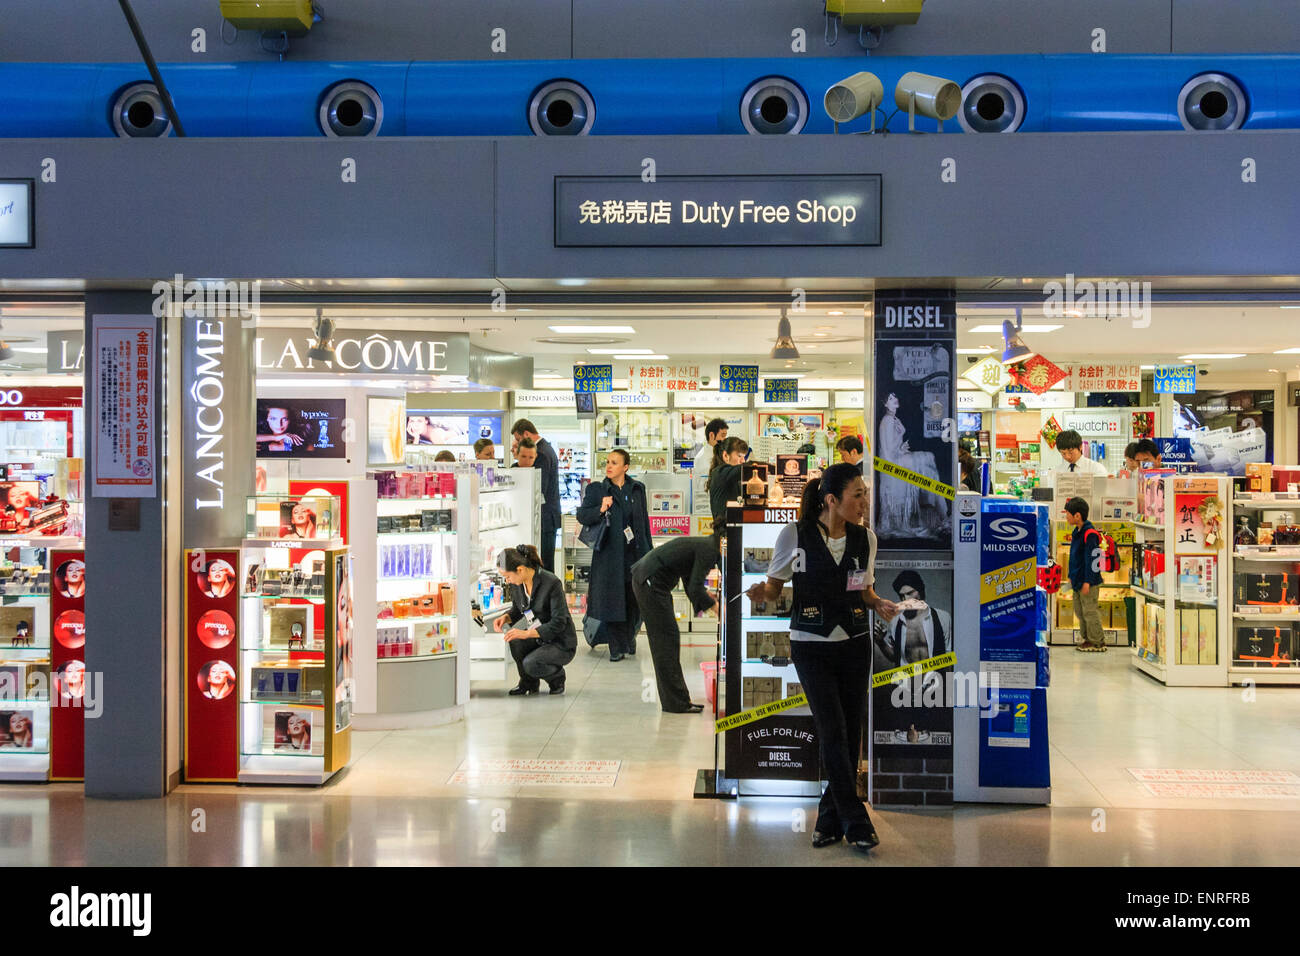 Kansai Airport Kix Duty Free Shop Entrance Inside The Departure Lounge With Promo Woman Standing Outside And Signs For Lancome And Diesel Stock Photo Alamy